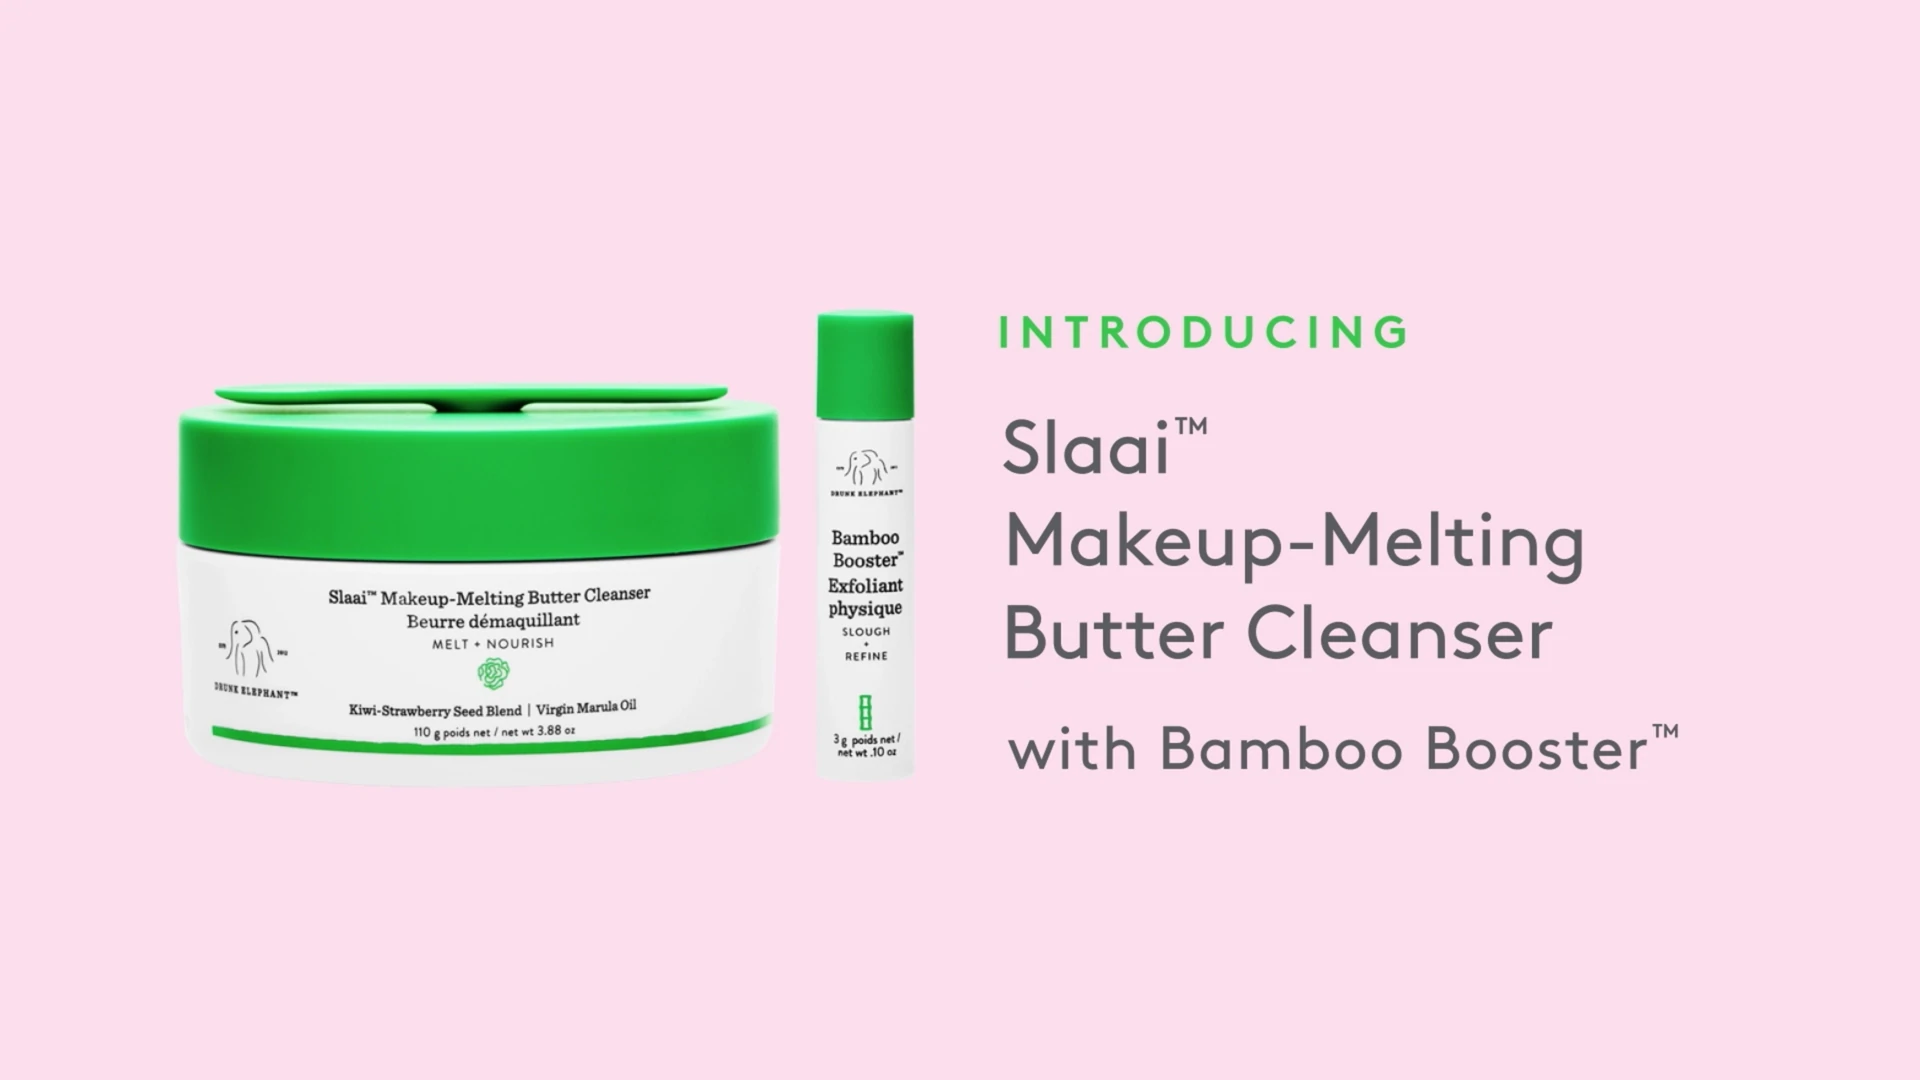 video detailing the benefits of Slaai Makeup Melting Butter Cleanser